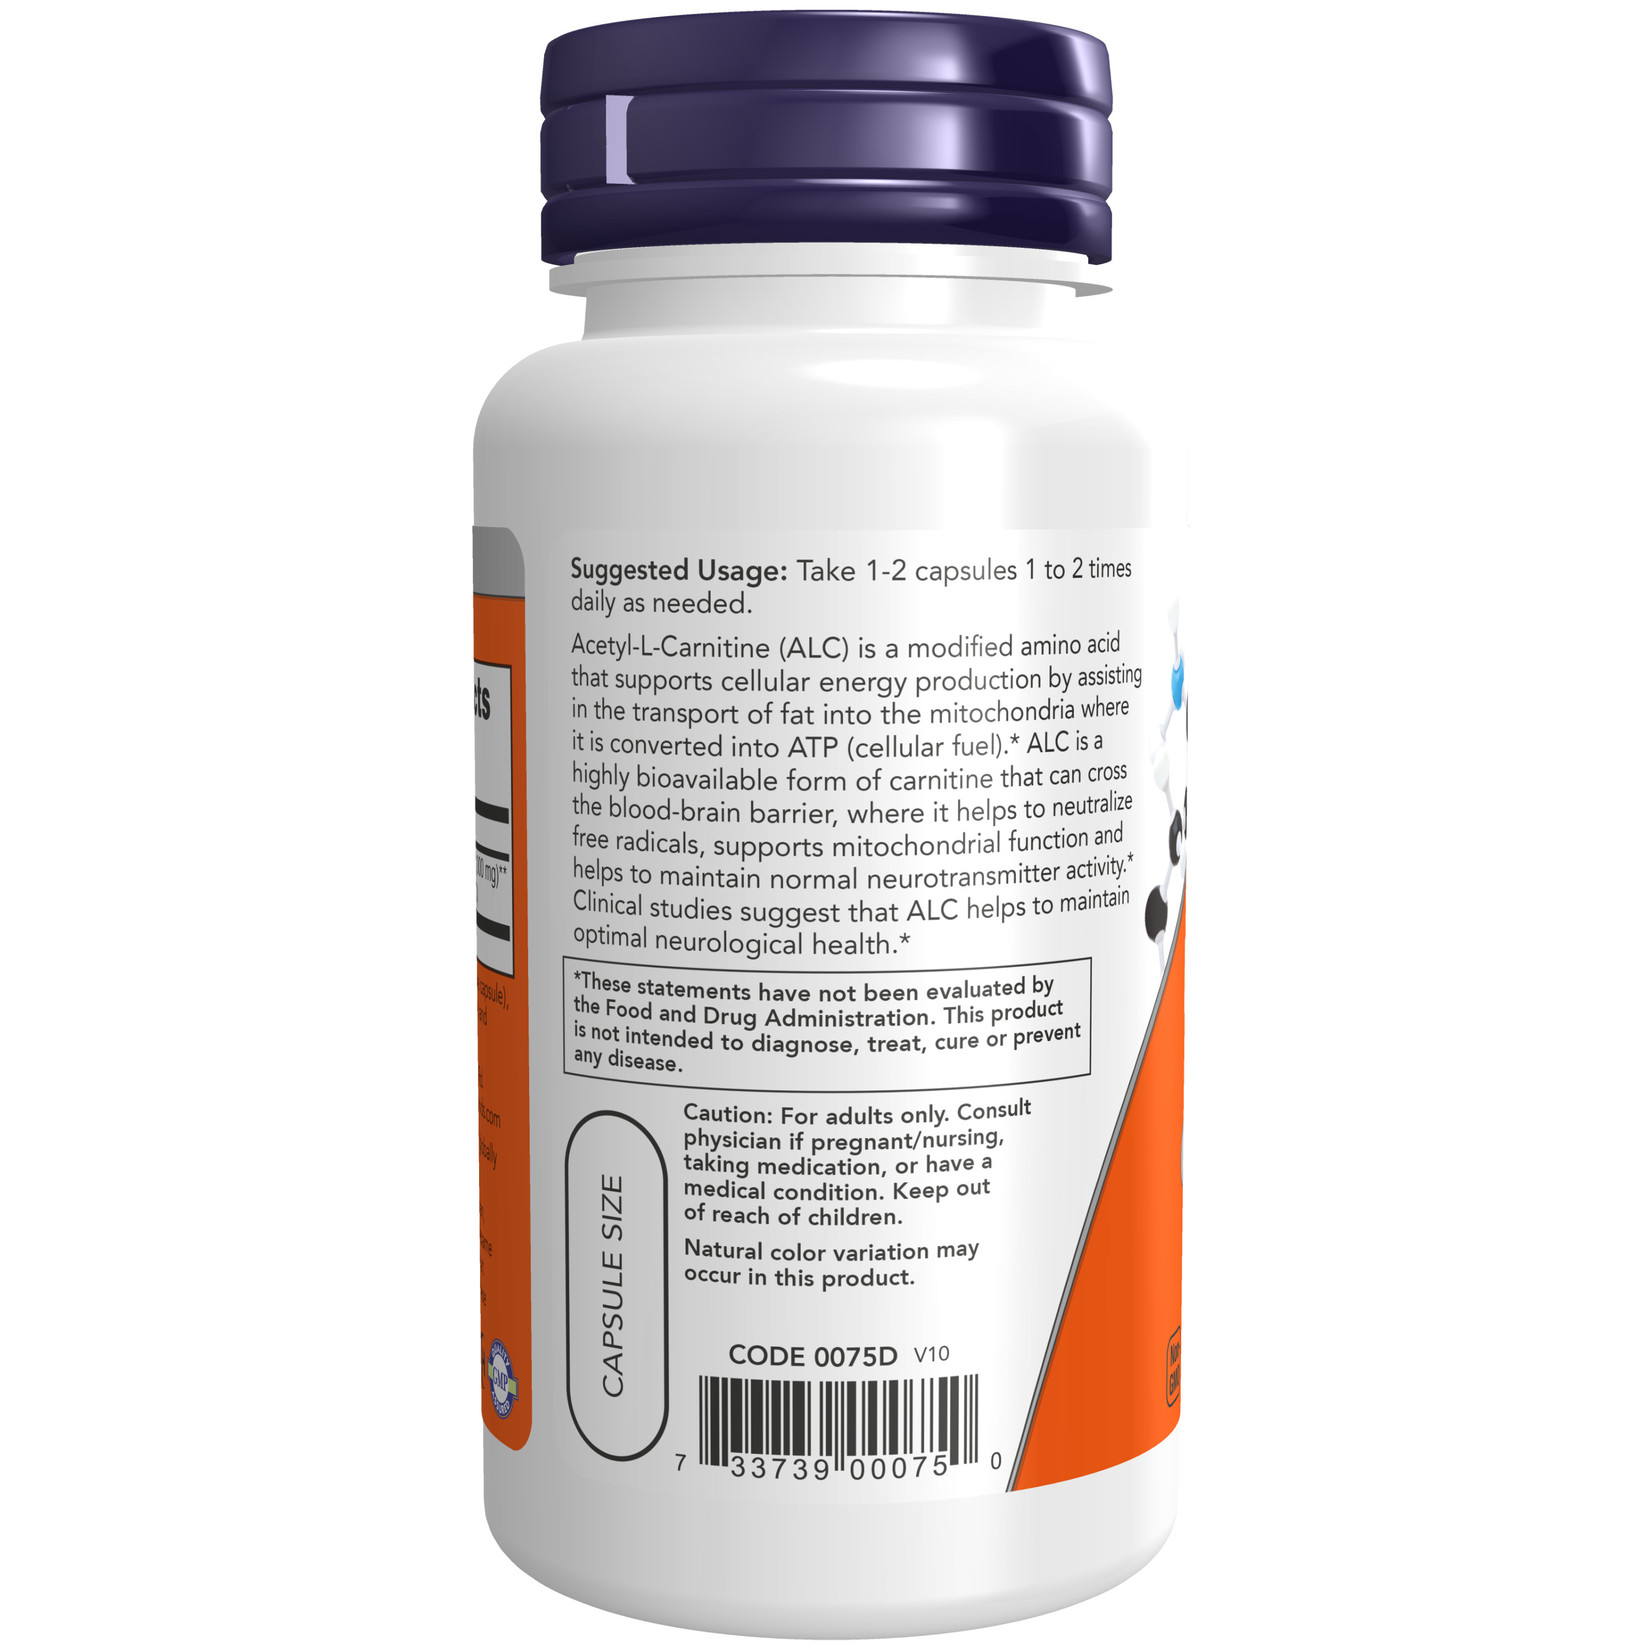 Now Now - Acetyl-L-Carnitine 500 mg - 100 Veg Capsules